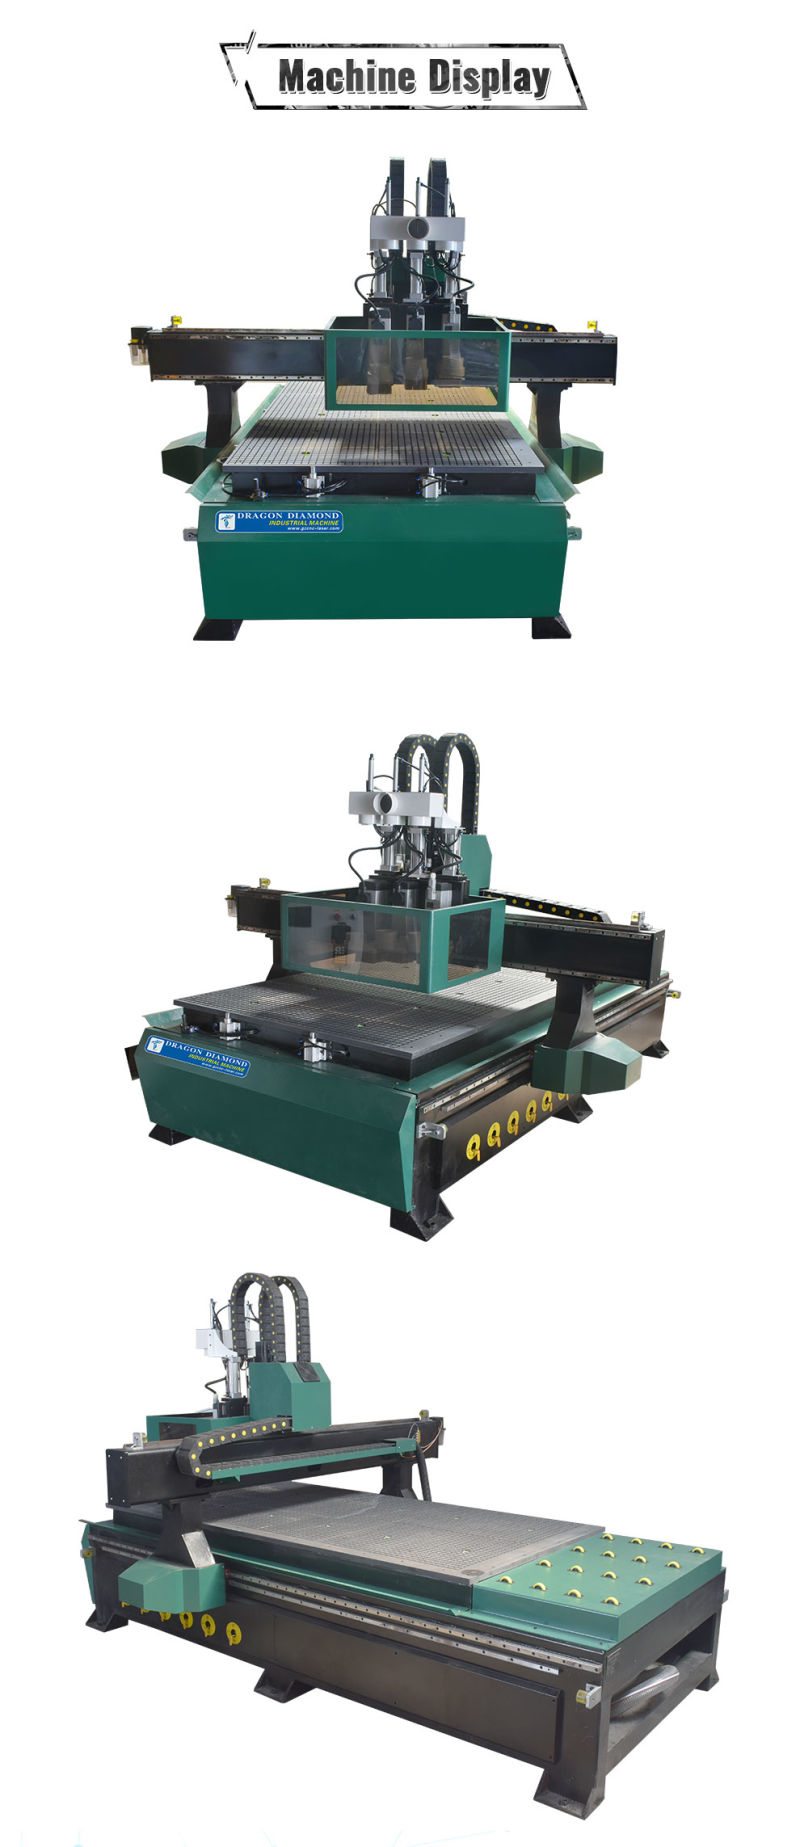 CNC Wood Router Multiple Spindle Safety Cover 1325 Engraving Machine with Feeding System